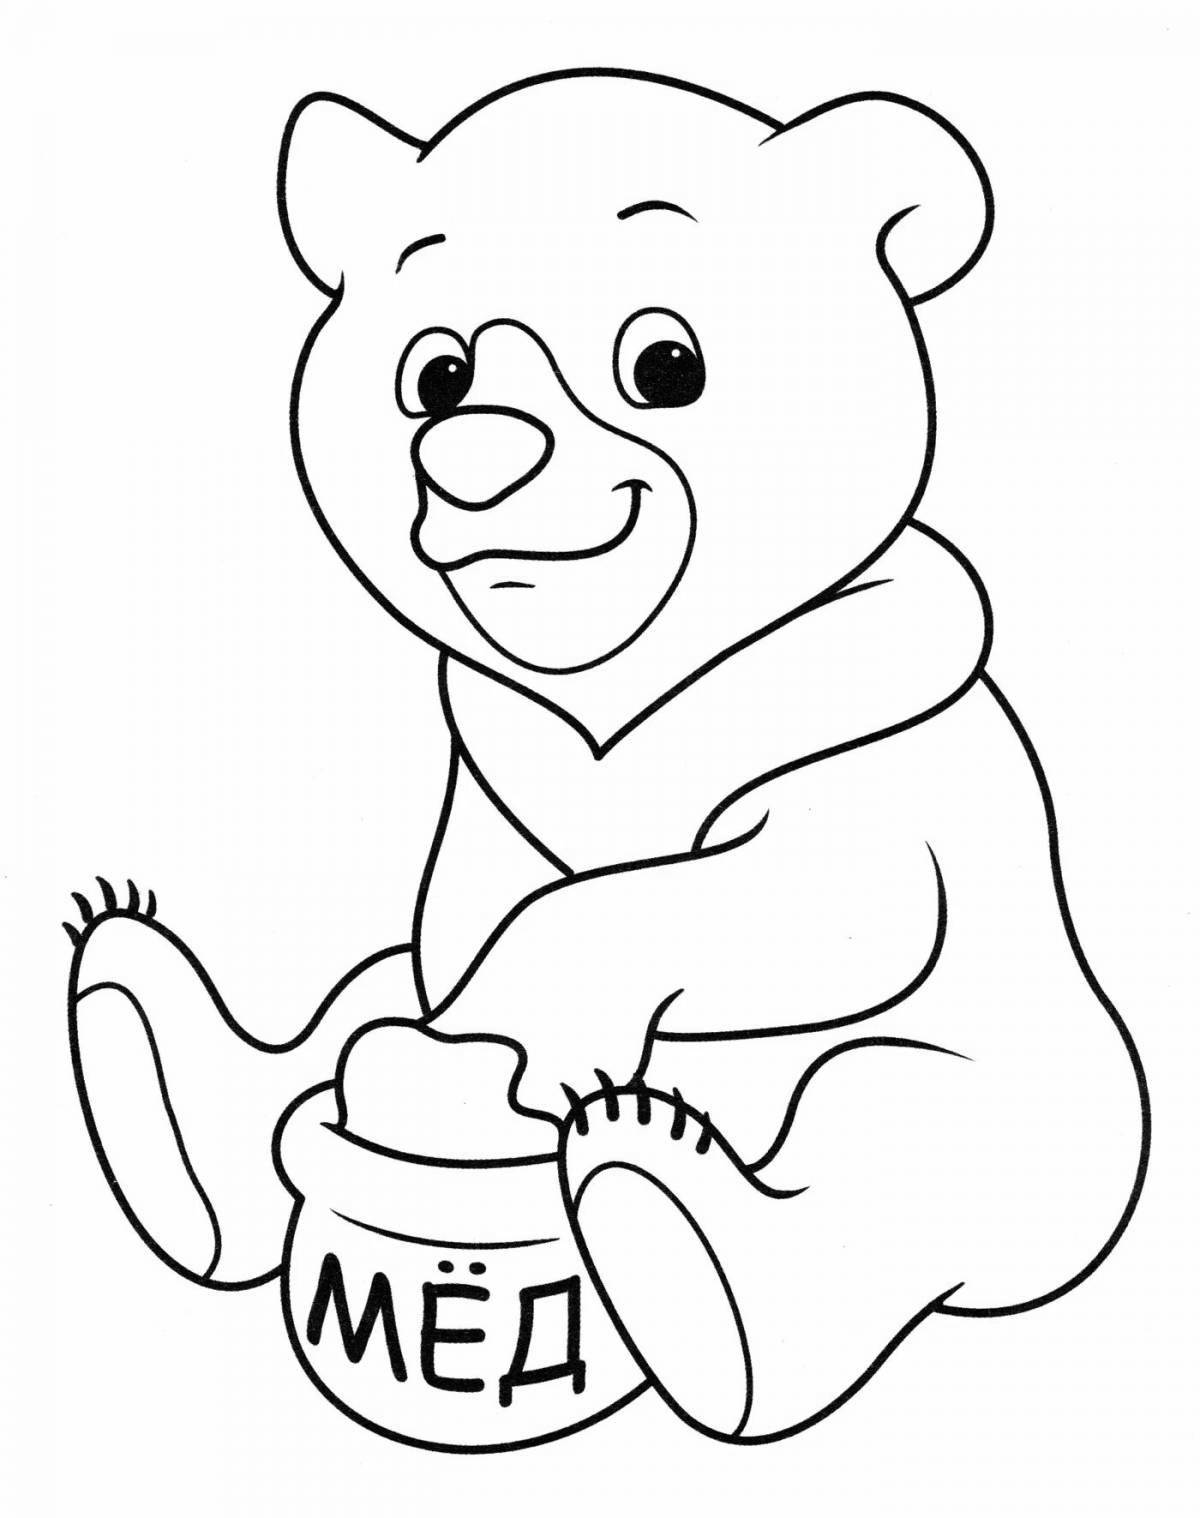 Coloring page affectionate bear cub and cub